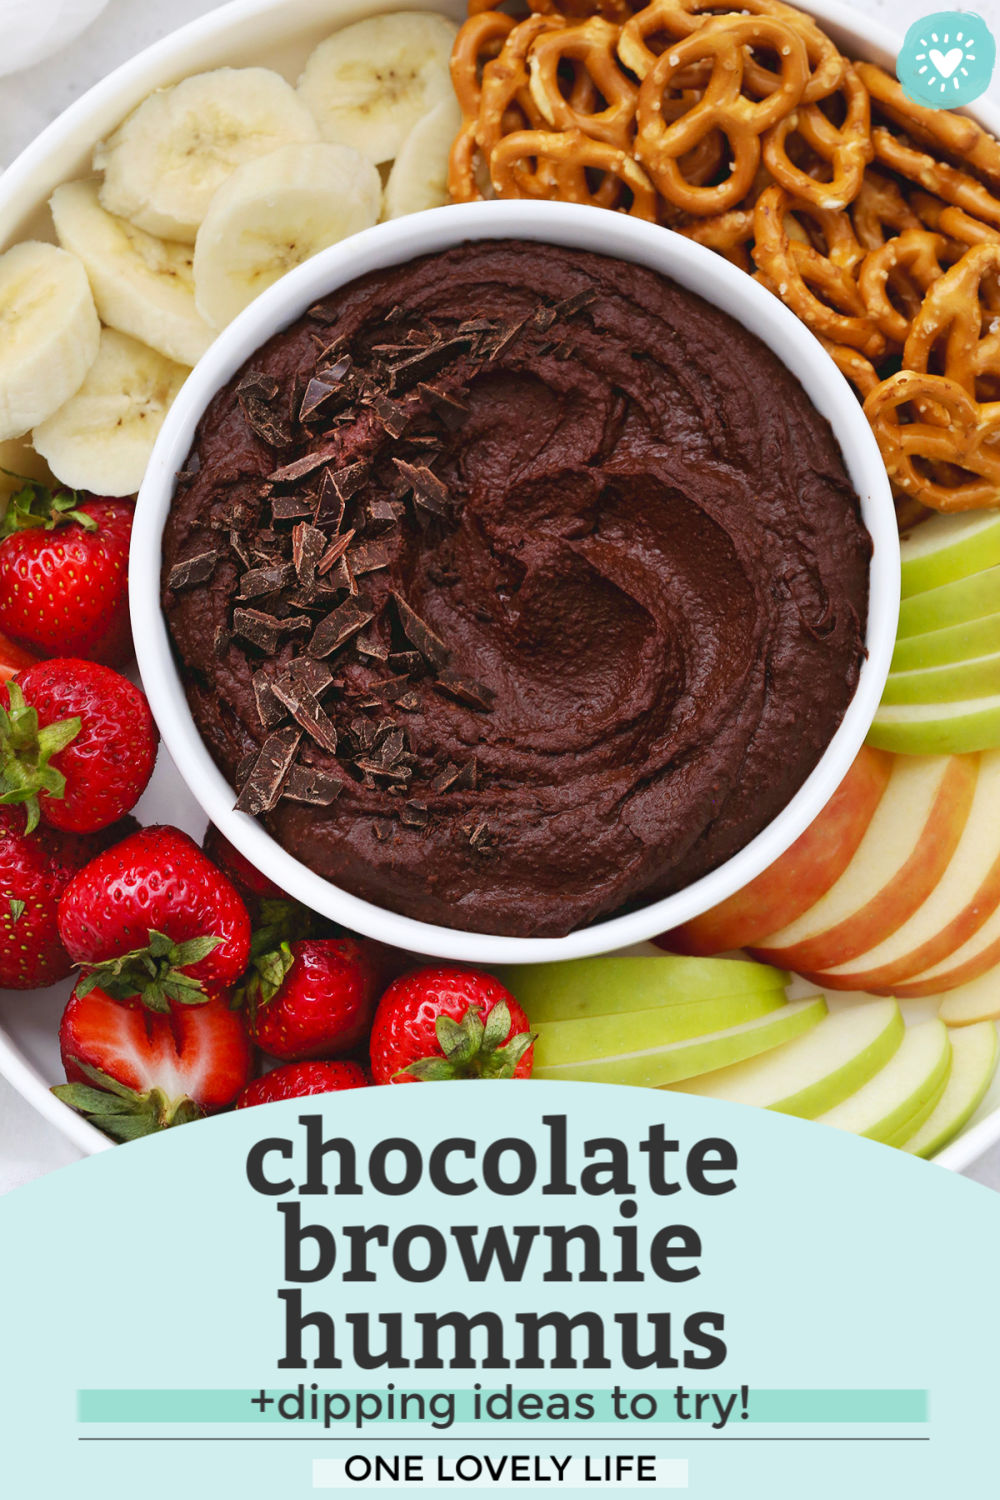 Overhead view of a bowl of chocolate brownie hummus on a fruit plate with text overlay that reads "Chocolate brownie hummus +dipping ideas to try! One Lovely Life"